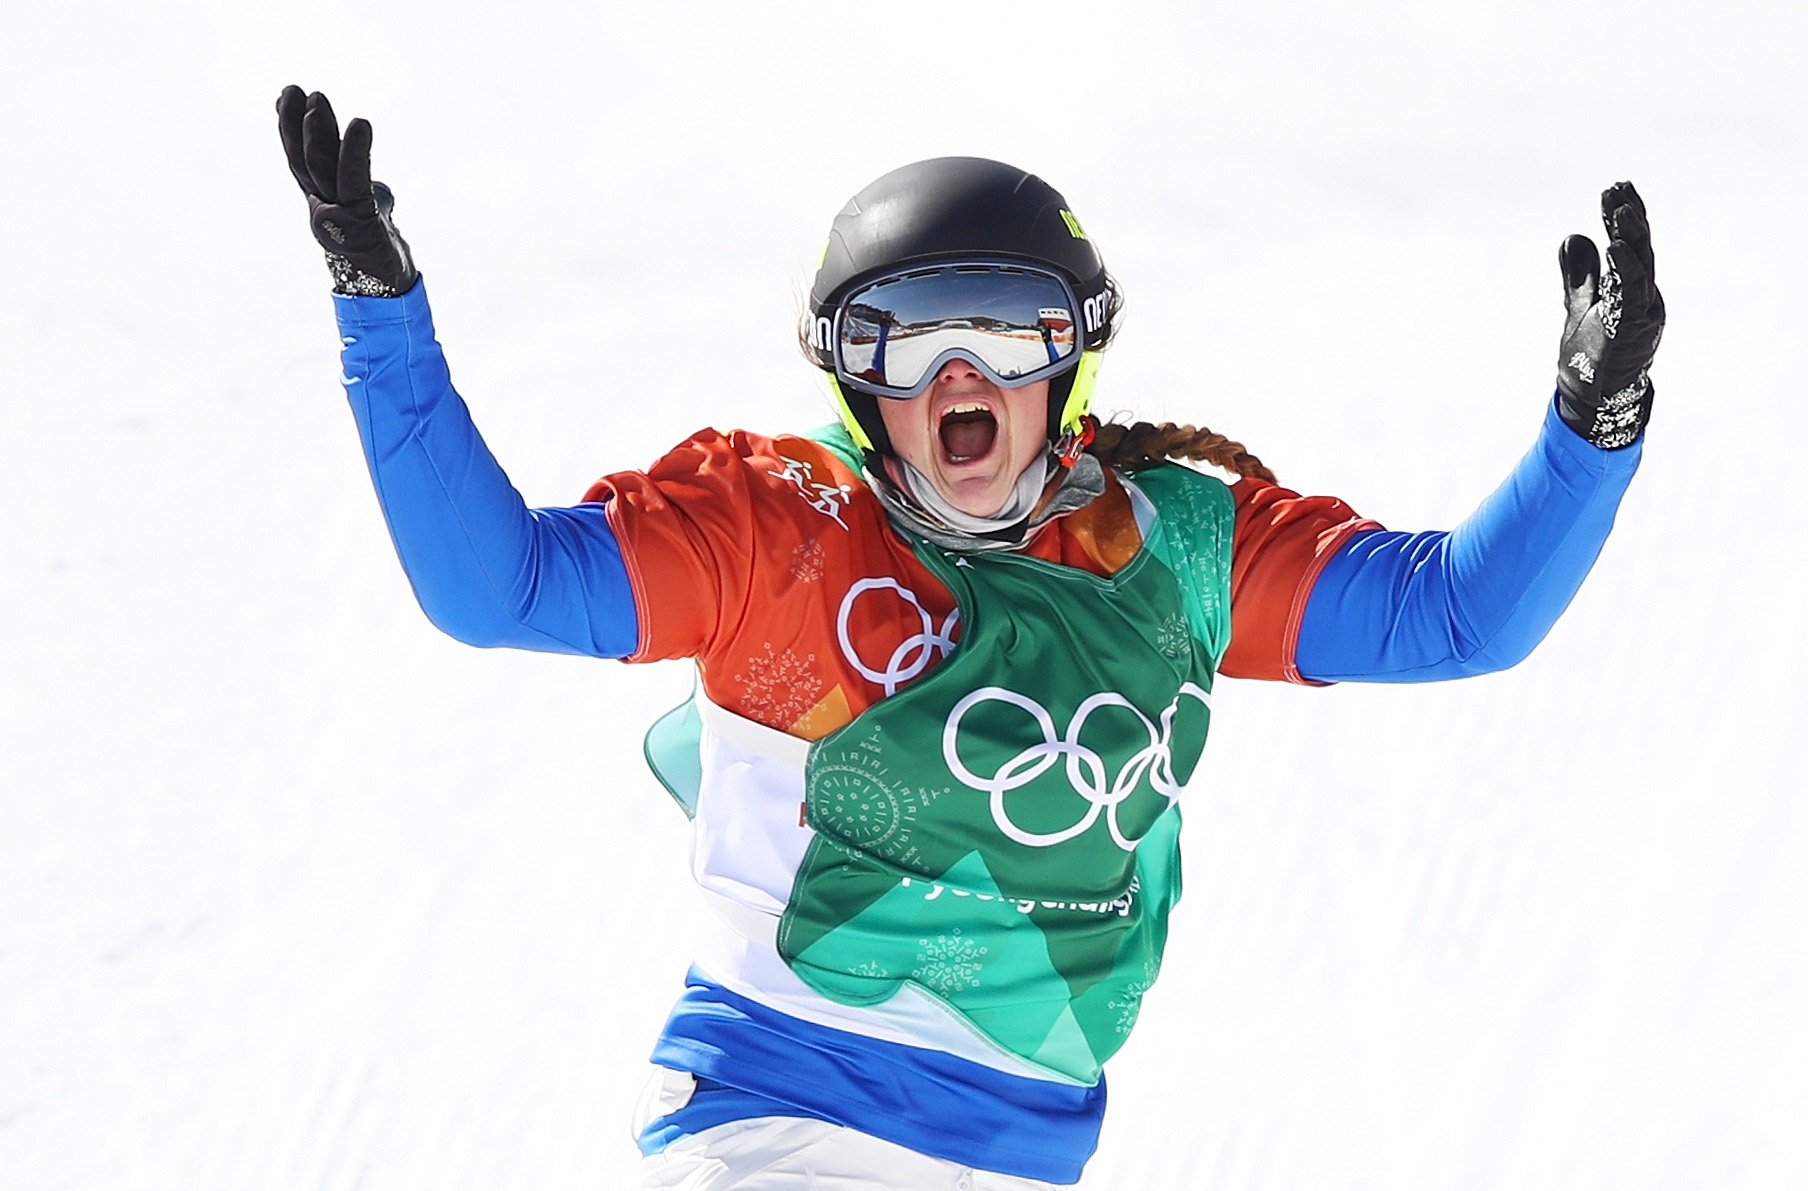 Michela Moioli of Italy celebrates winning gold in the Ladies' Snowboard Cross gold medal at the PyeongChang 2018 Winter Olympic Games on Feb. 16, 2018. (Michela Moioli of Italy celebrates winning gold in the Ladies' Snowboard Cross gold medal at the PyeongChang 2018 Winter Olympic Games on Feb. 16, 2018.)